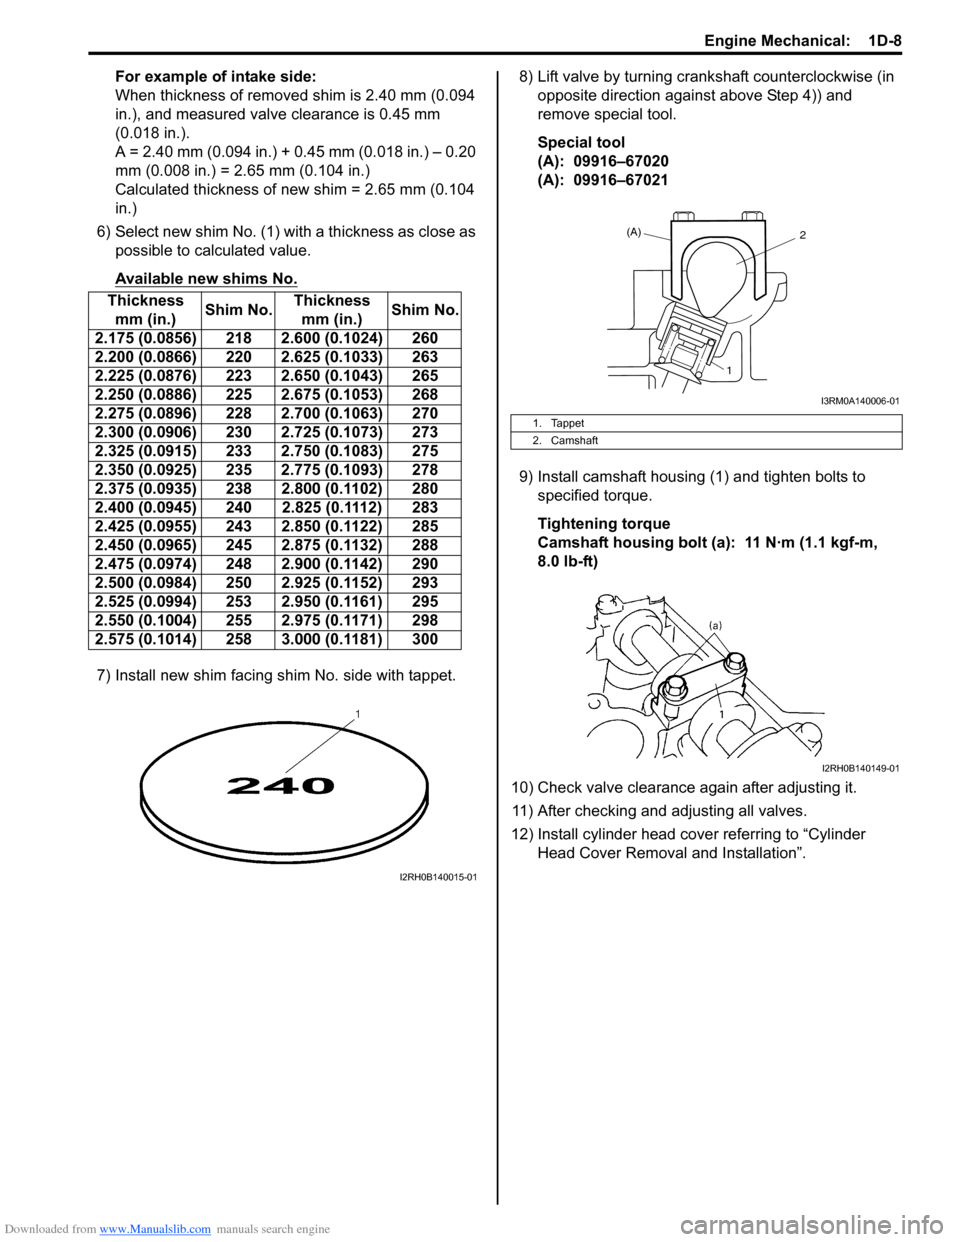 SUZUKI SWIFT 2007 2.G Service Service Manual Downloaded from www.Manualslib.com manuals search engine Engine Mechanical:  1D-8
For example of intake side:
When thickness of removed shim is 2.40 mm (0.094 
in.), and measured valve clearance is 0.